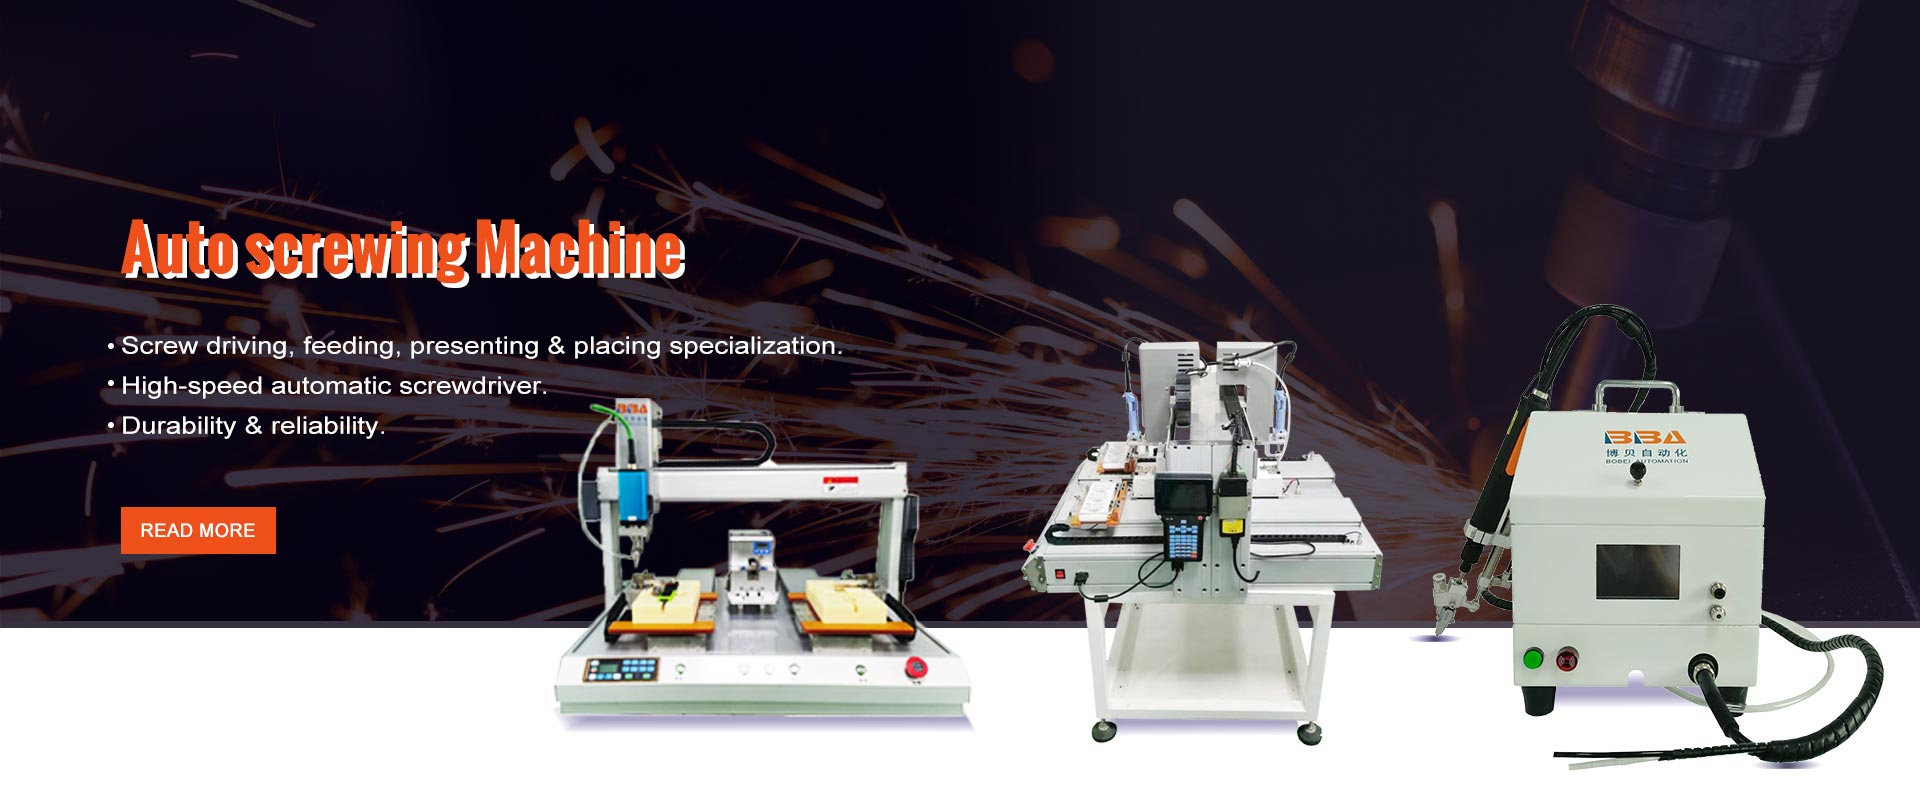 Fully automated screw dispenser machine with double screwdrivers